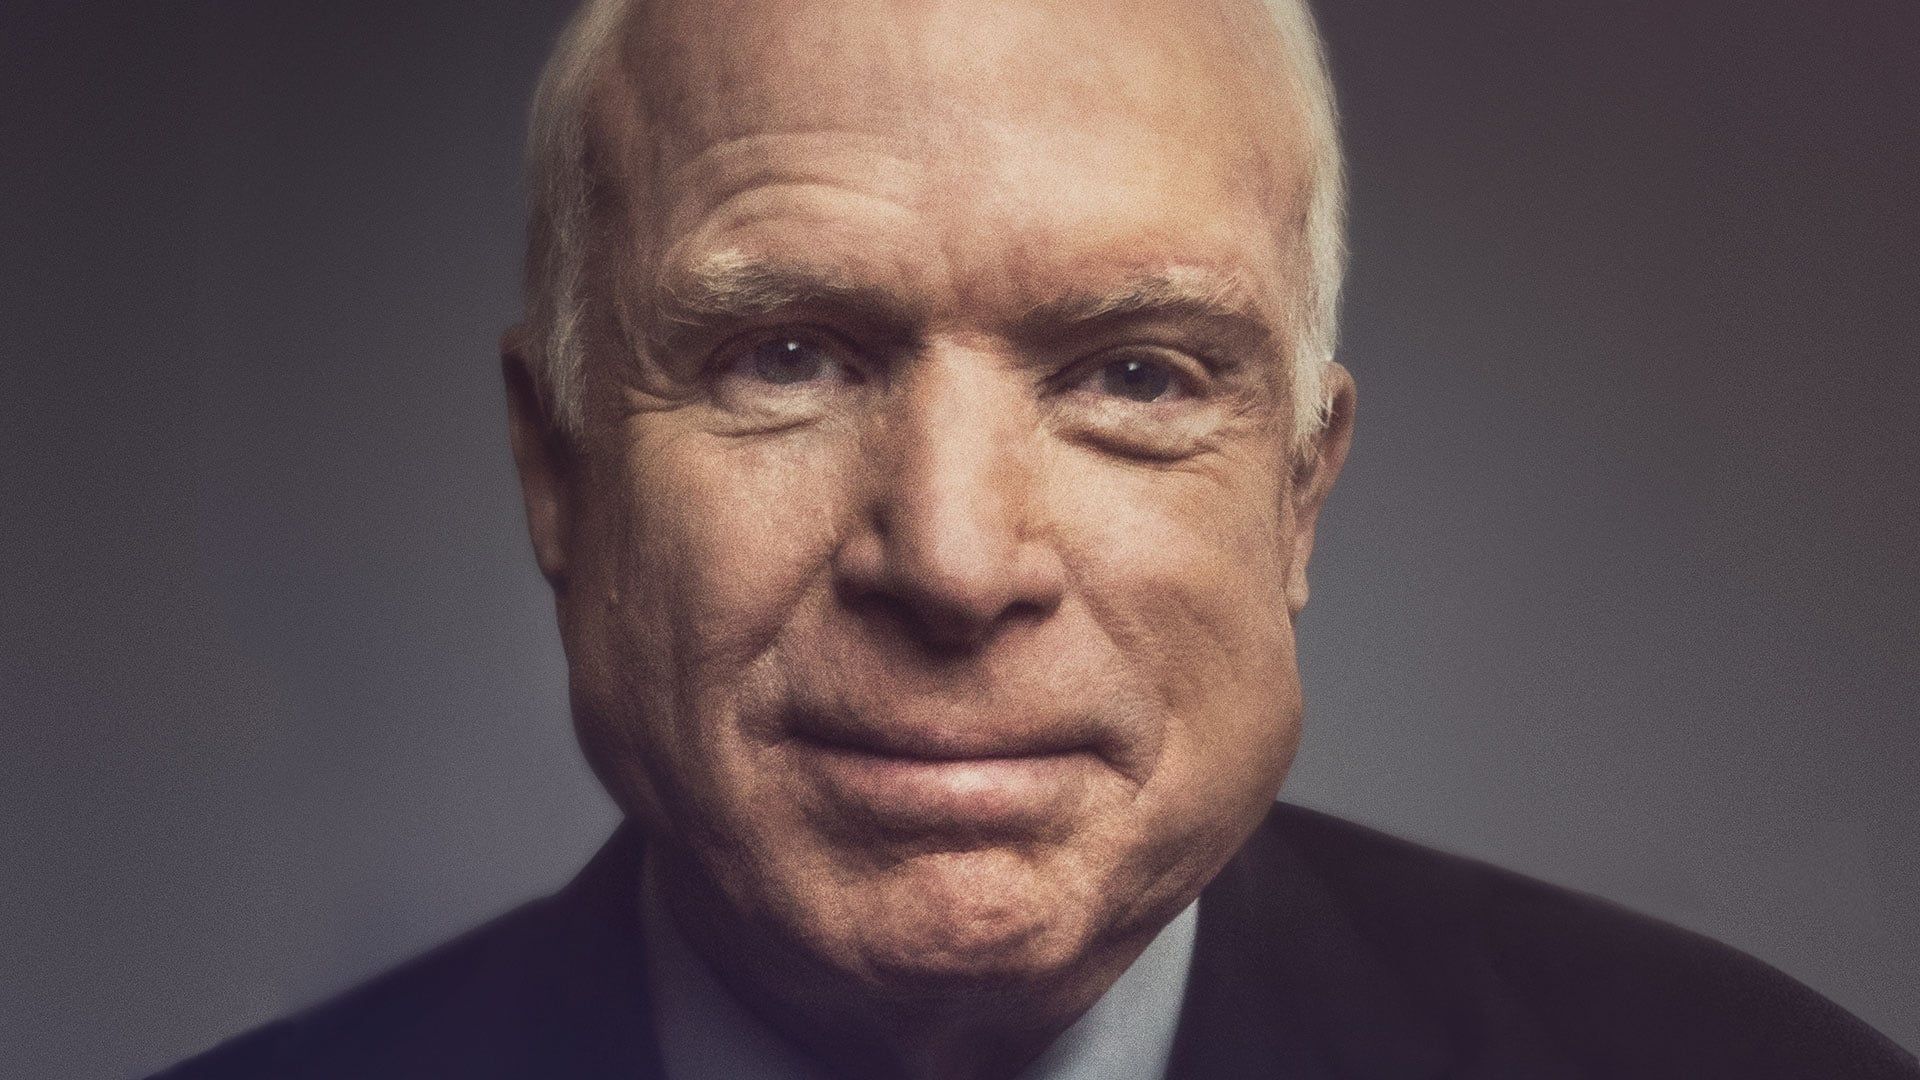 John McCain: For Whom the Bell Tolls background